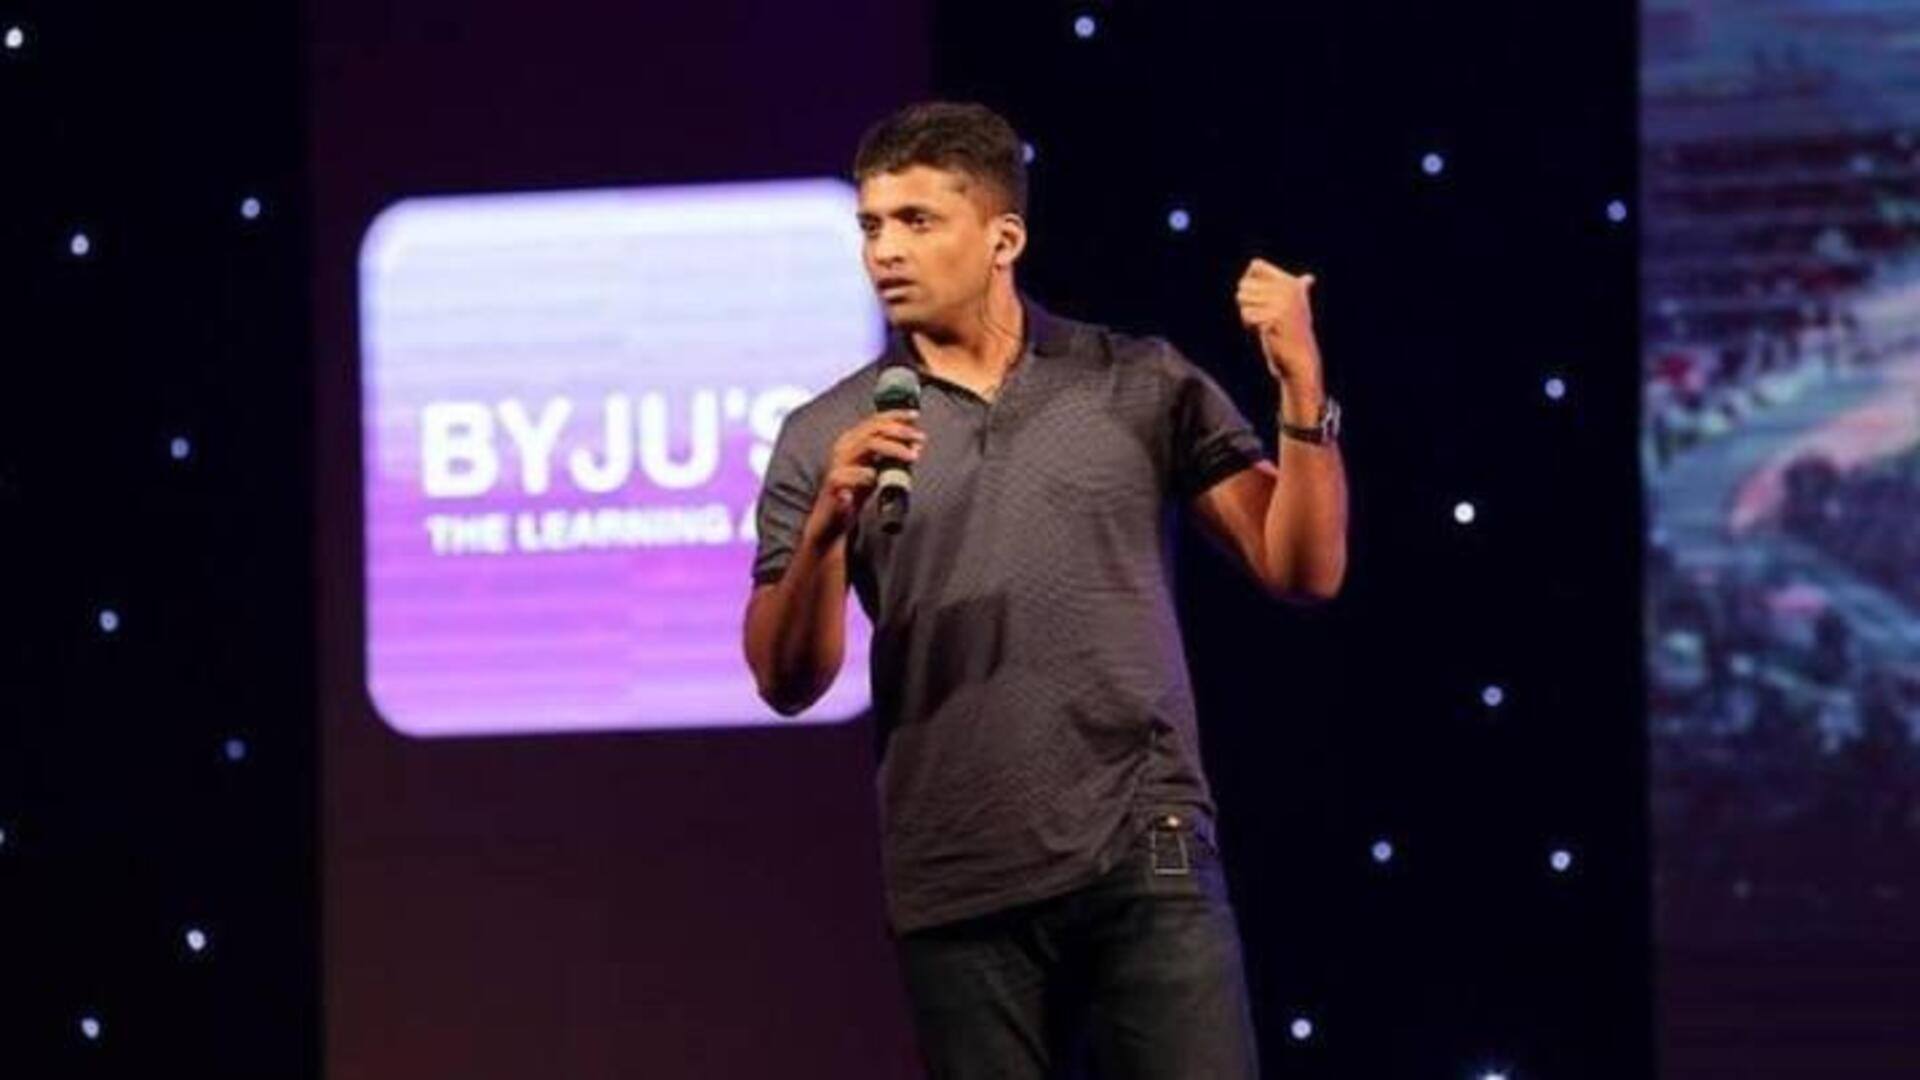 BYJU'S raises $200M through rights issue at 99% valuation cut